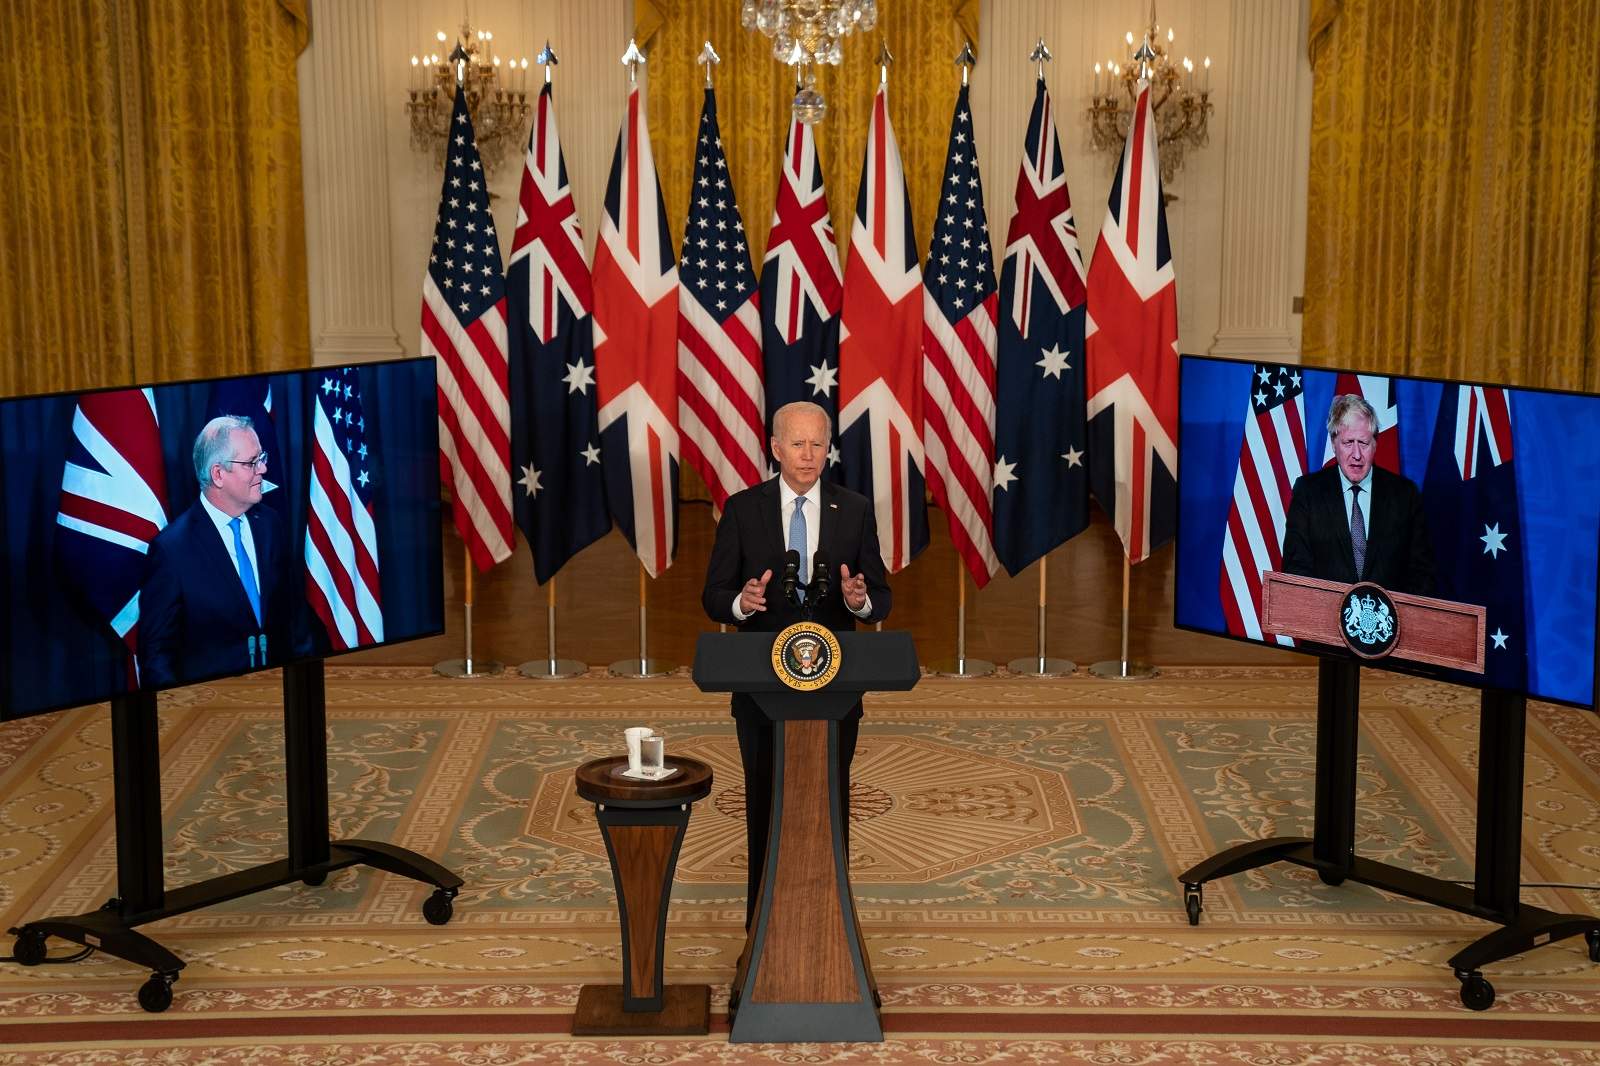 Australia, the United Kingdom, and the United States announced a new trilateral security partnership to counter China’s growing influence in the Indo-Pacific region.